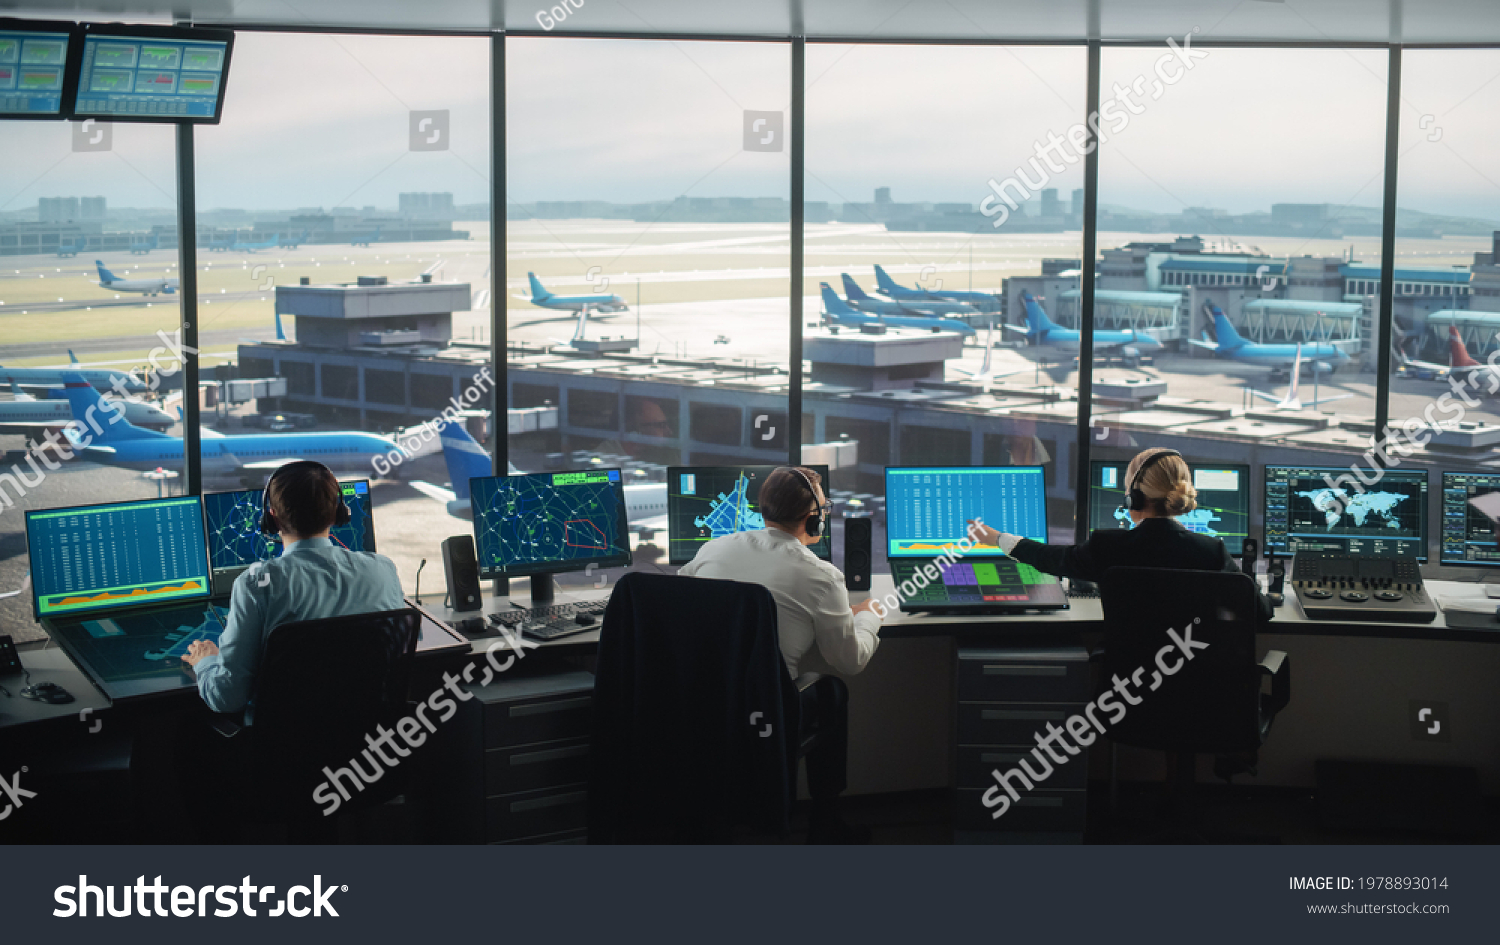 Diverse Air Traffic Control Team Working in a Modern Airport Tower. Office Room is Full of Desktop Computer Displays with Navigation Screens, Airplane Departure and Arrival Data for Controllers. #1978893014